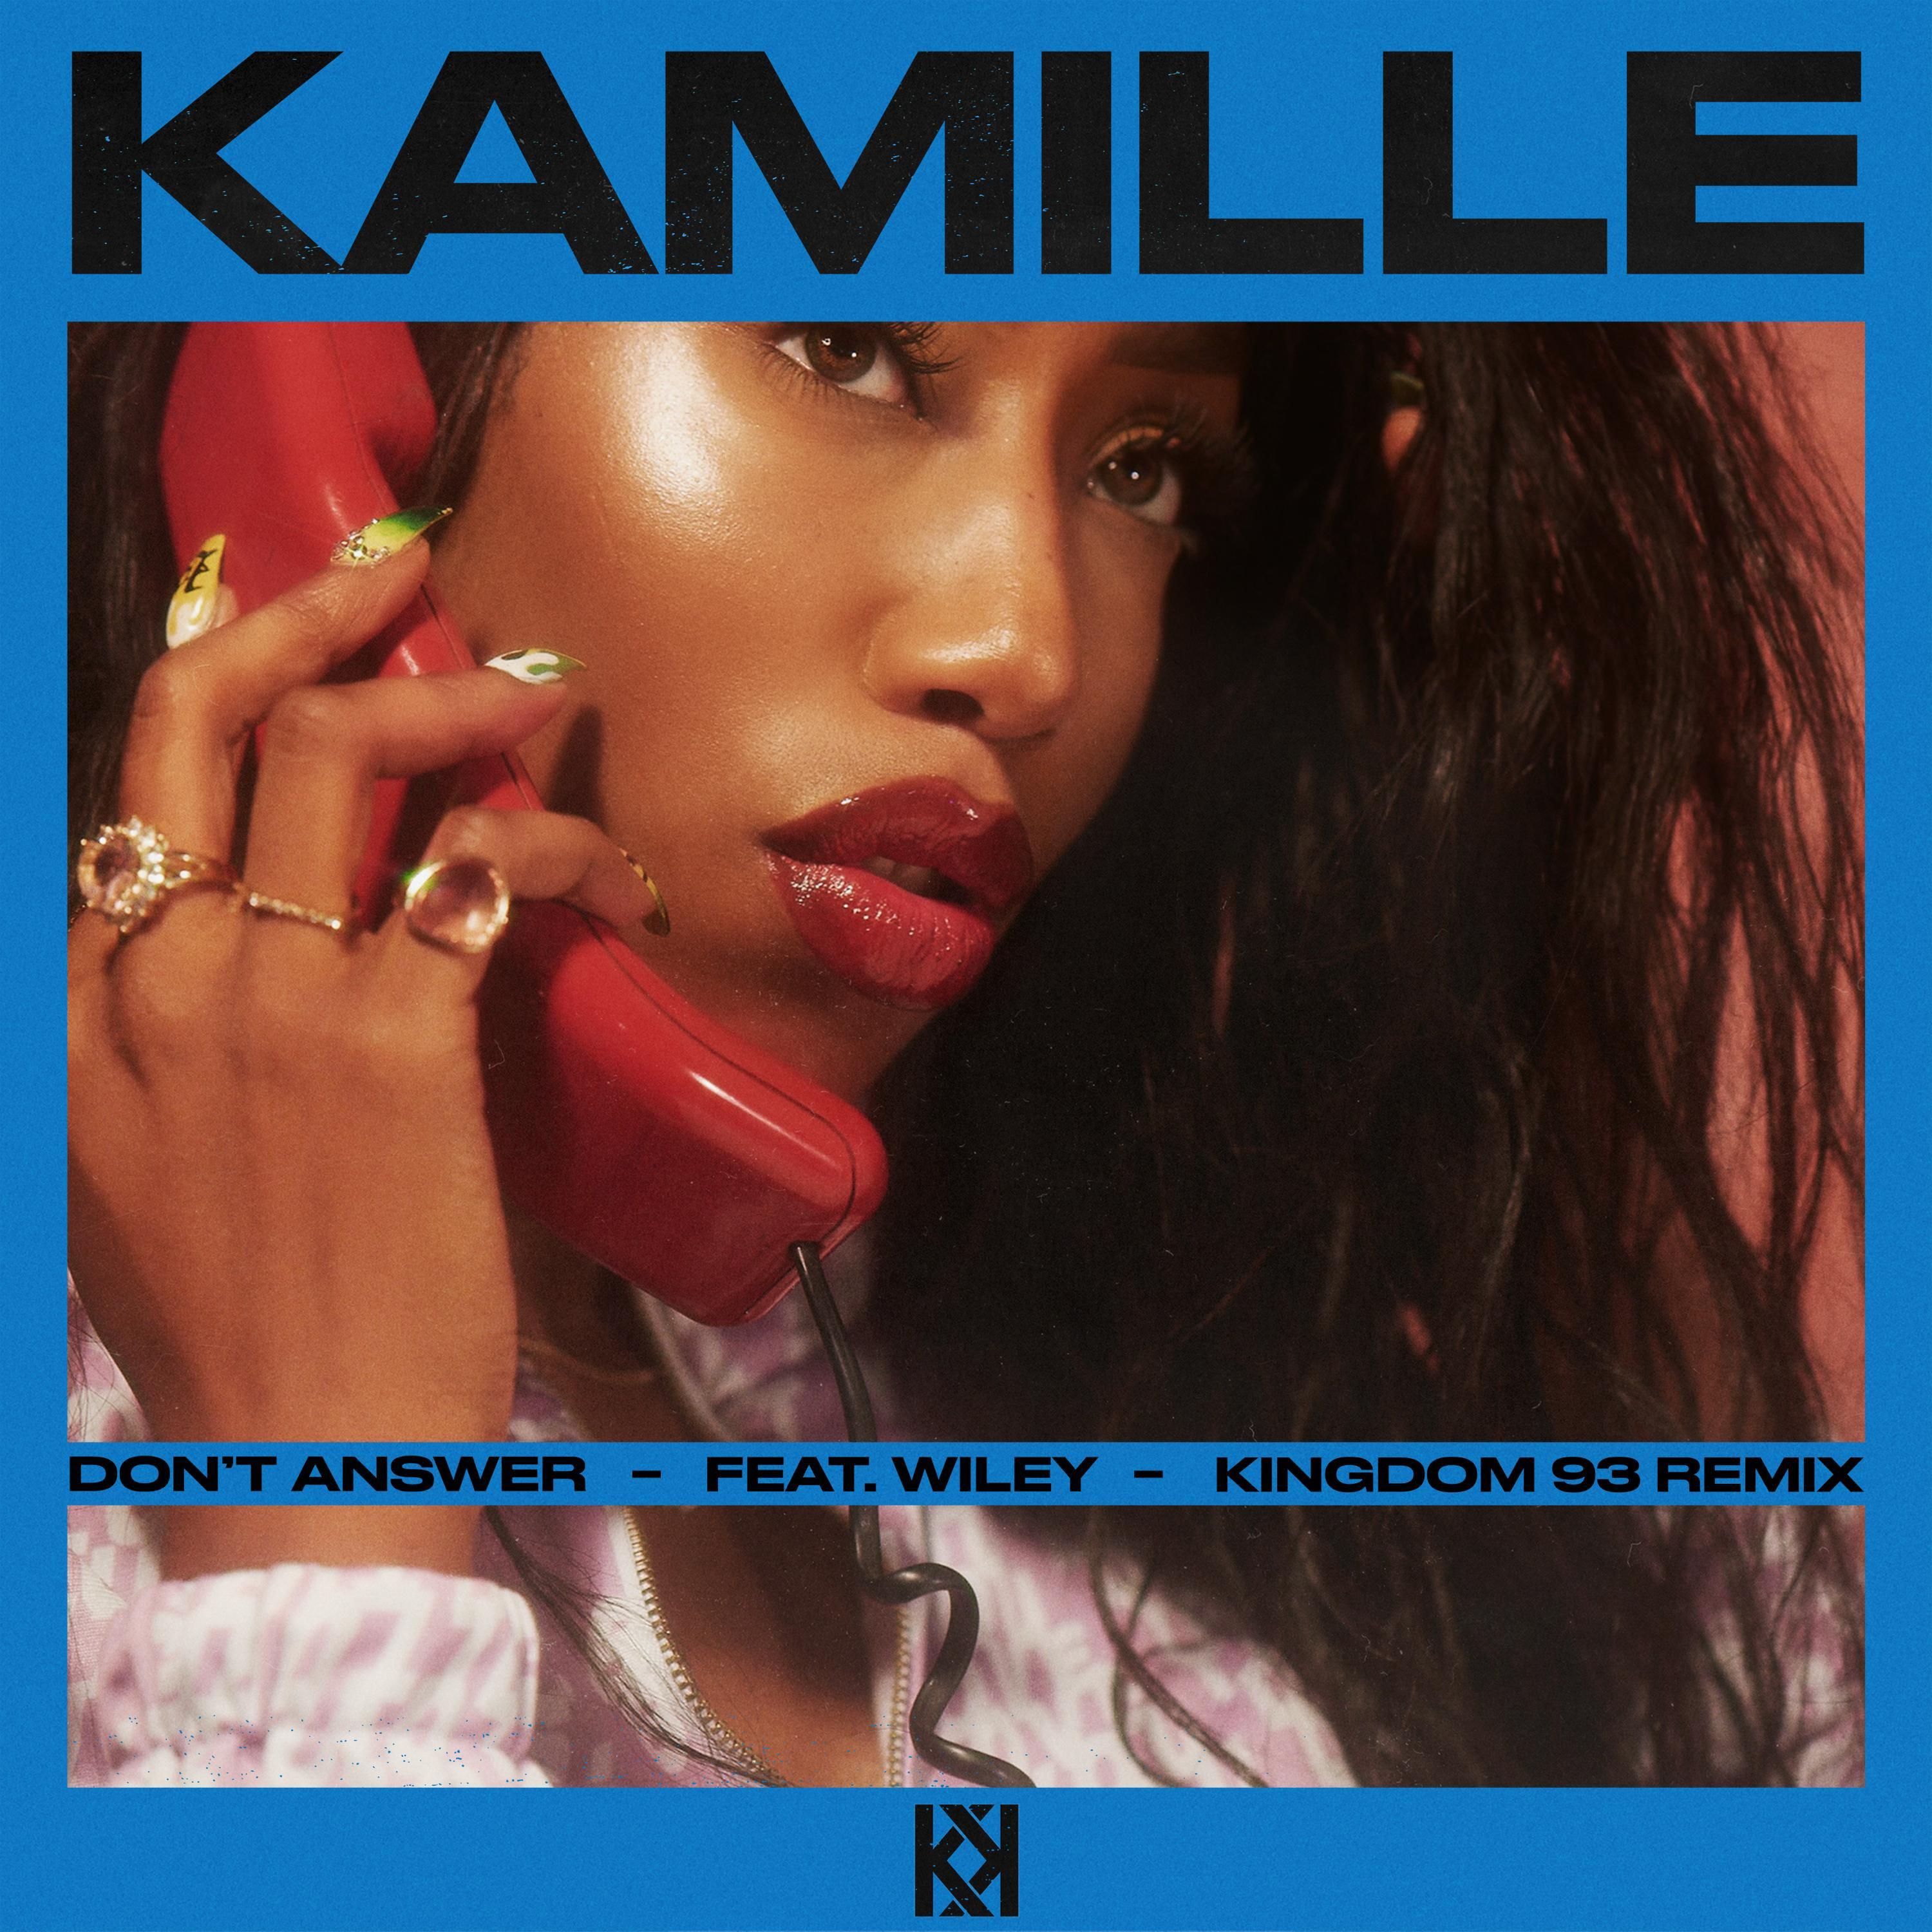 Kamille - Don't Answer (feat. Wiley) (Kingdom 93 Remix)